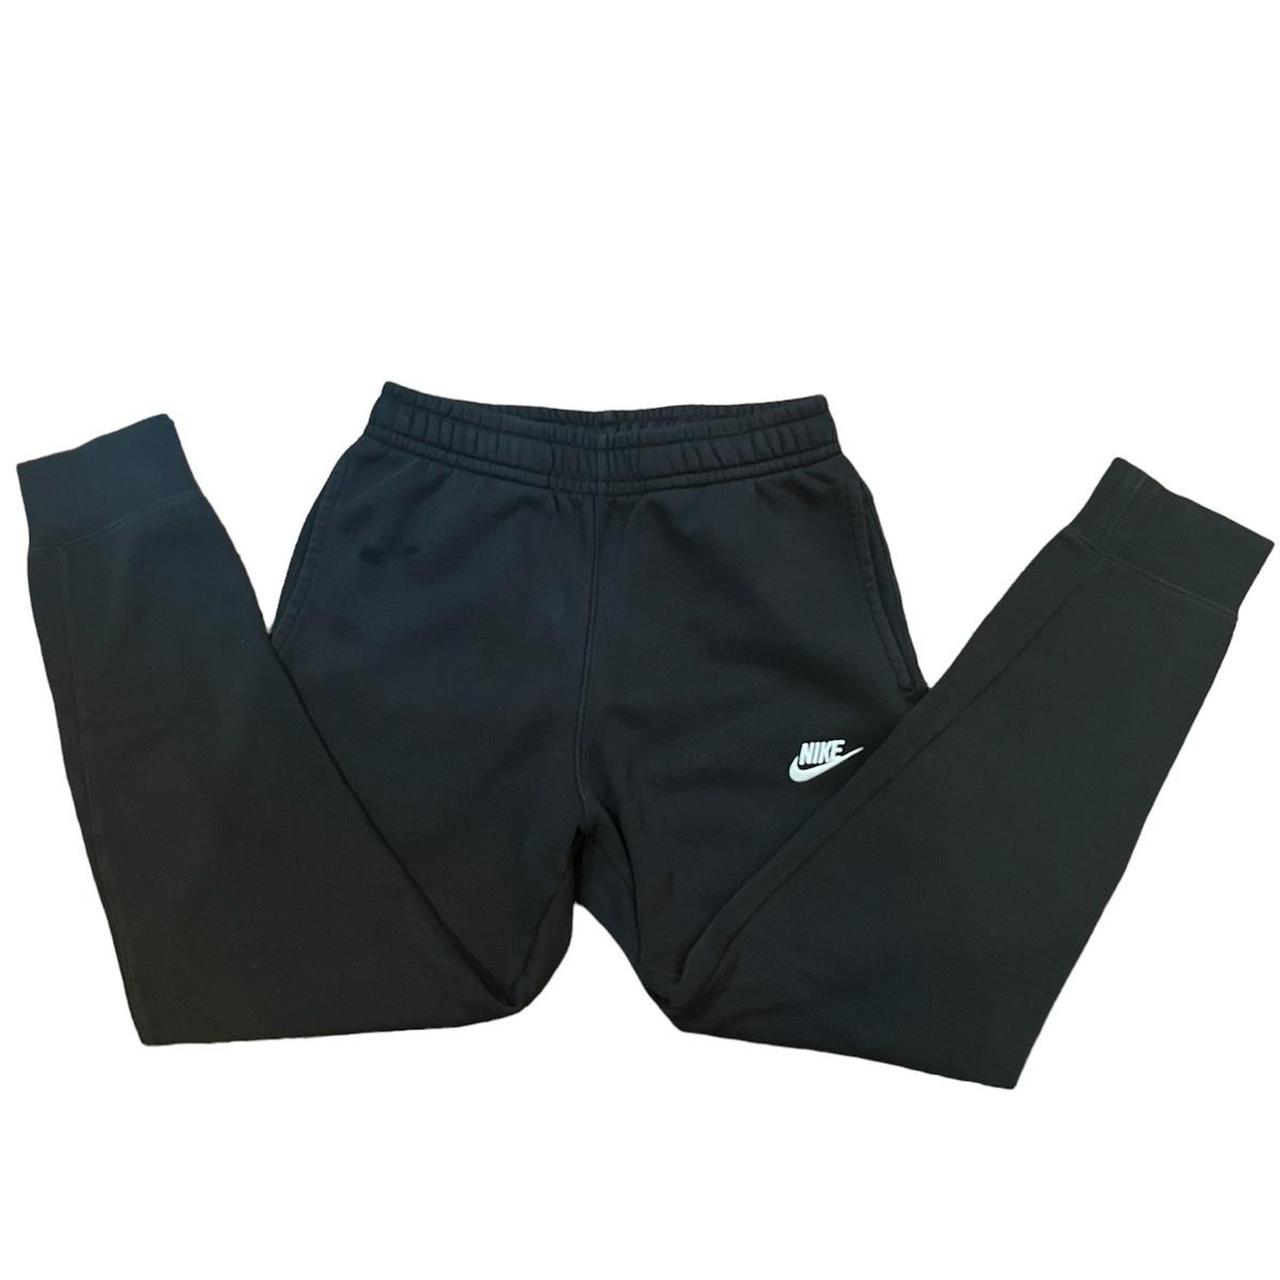 Nike Women's Black and White Joggers-tracksuits